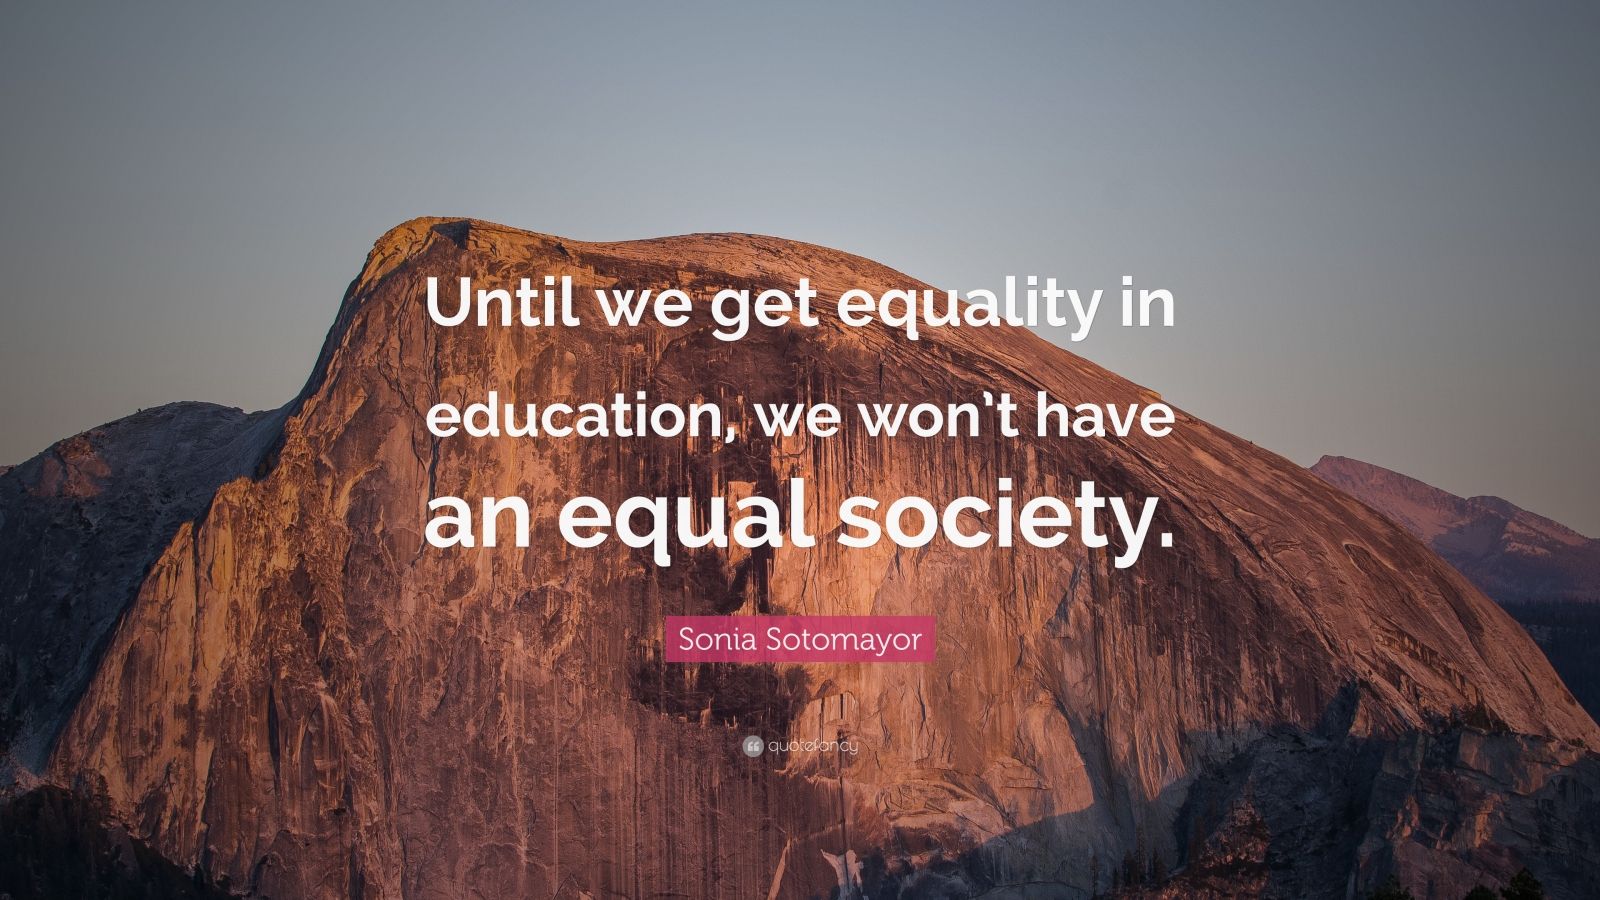 Sonia Sotomayor Quote “Until we get equality in education